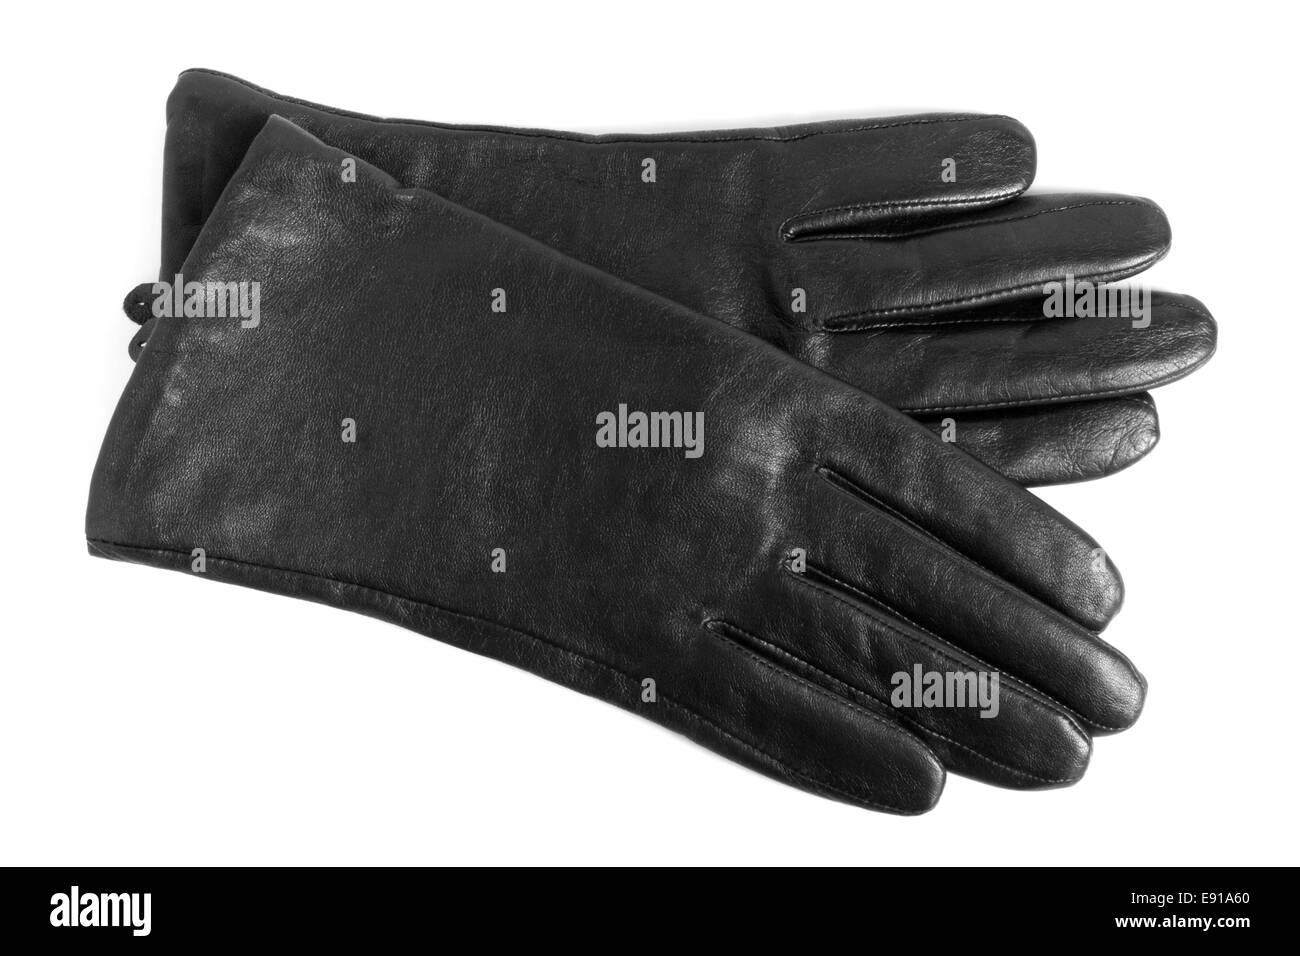 Ladies gloves Black and White Stock Photos & Images - Alamy